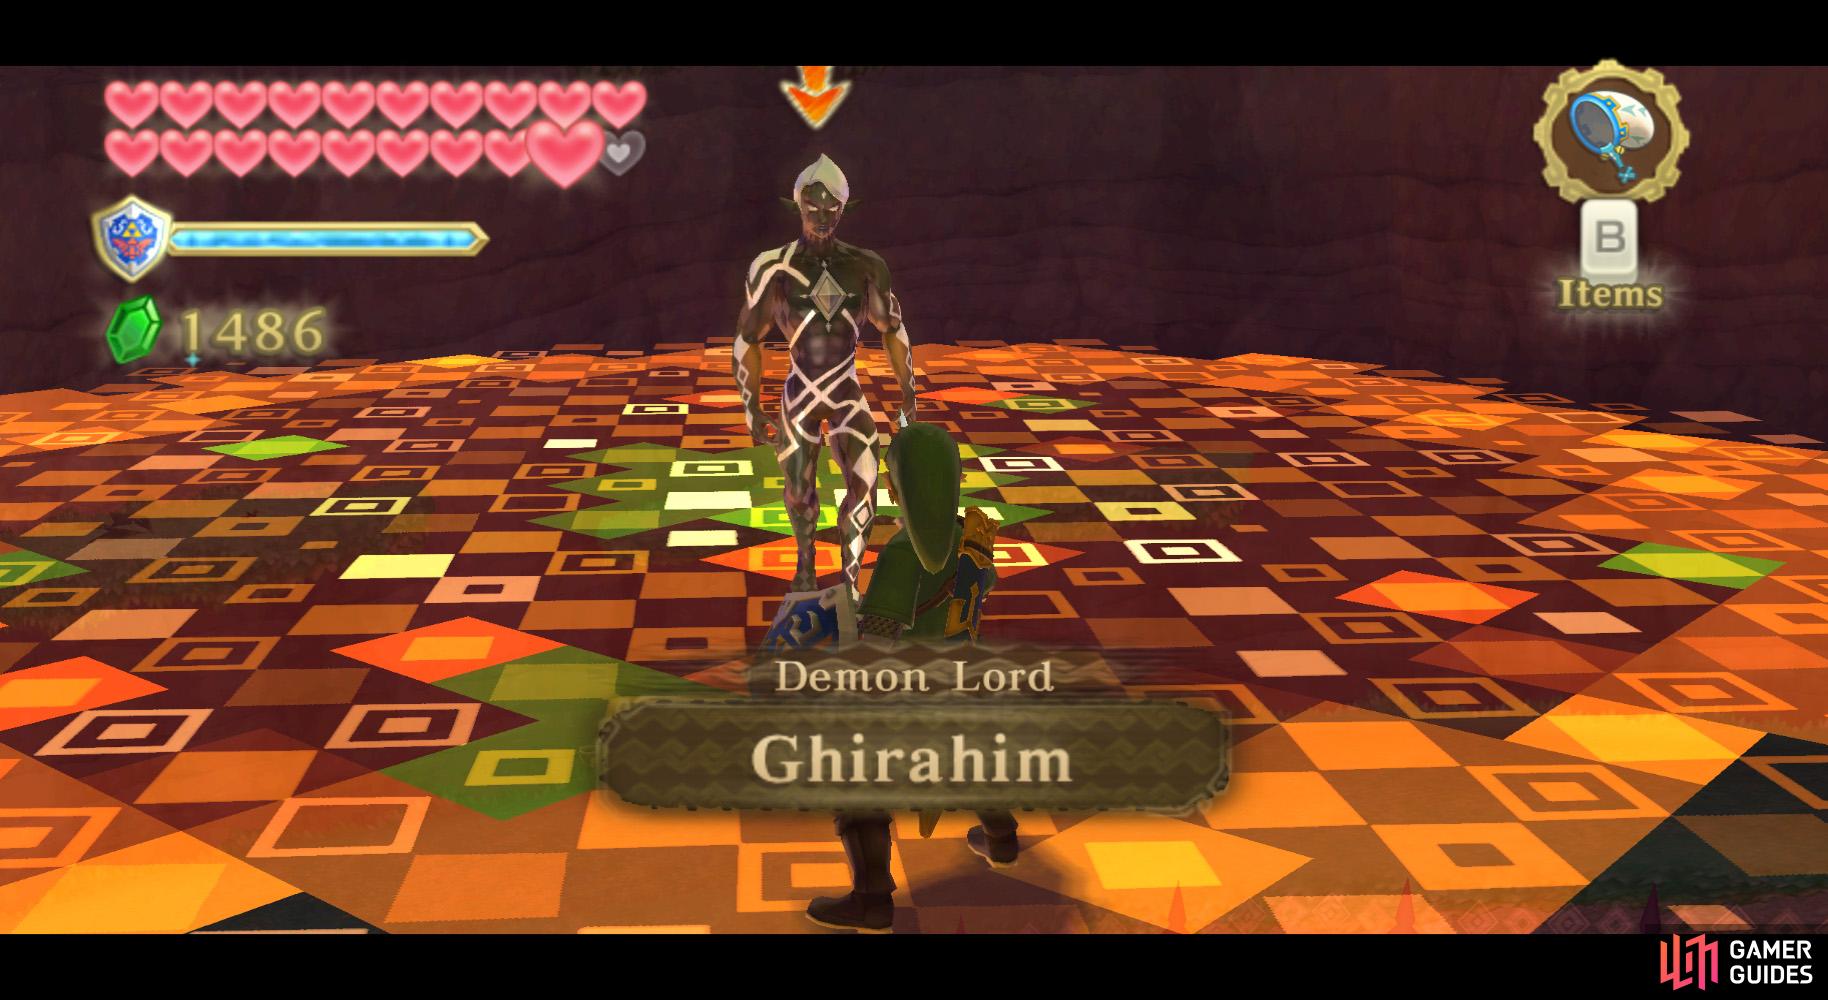 Youre looking at Ghirahim in his final form.